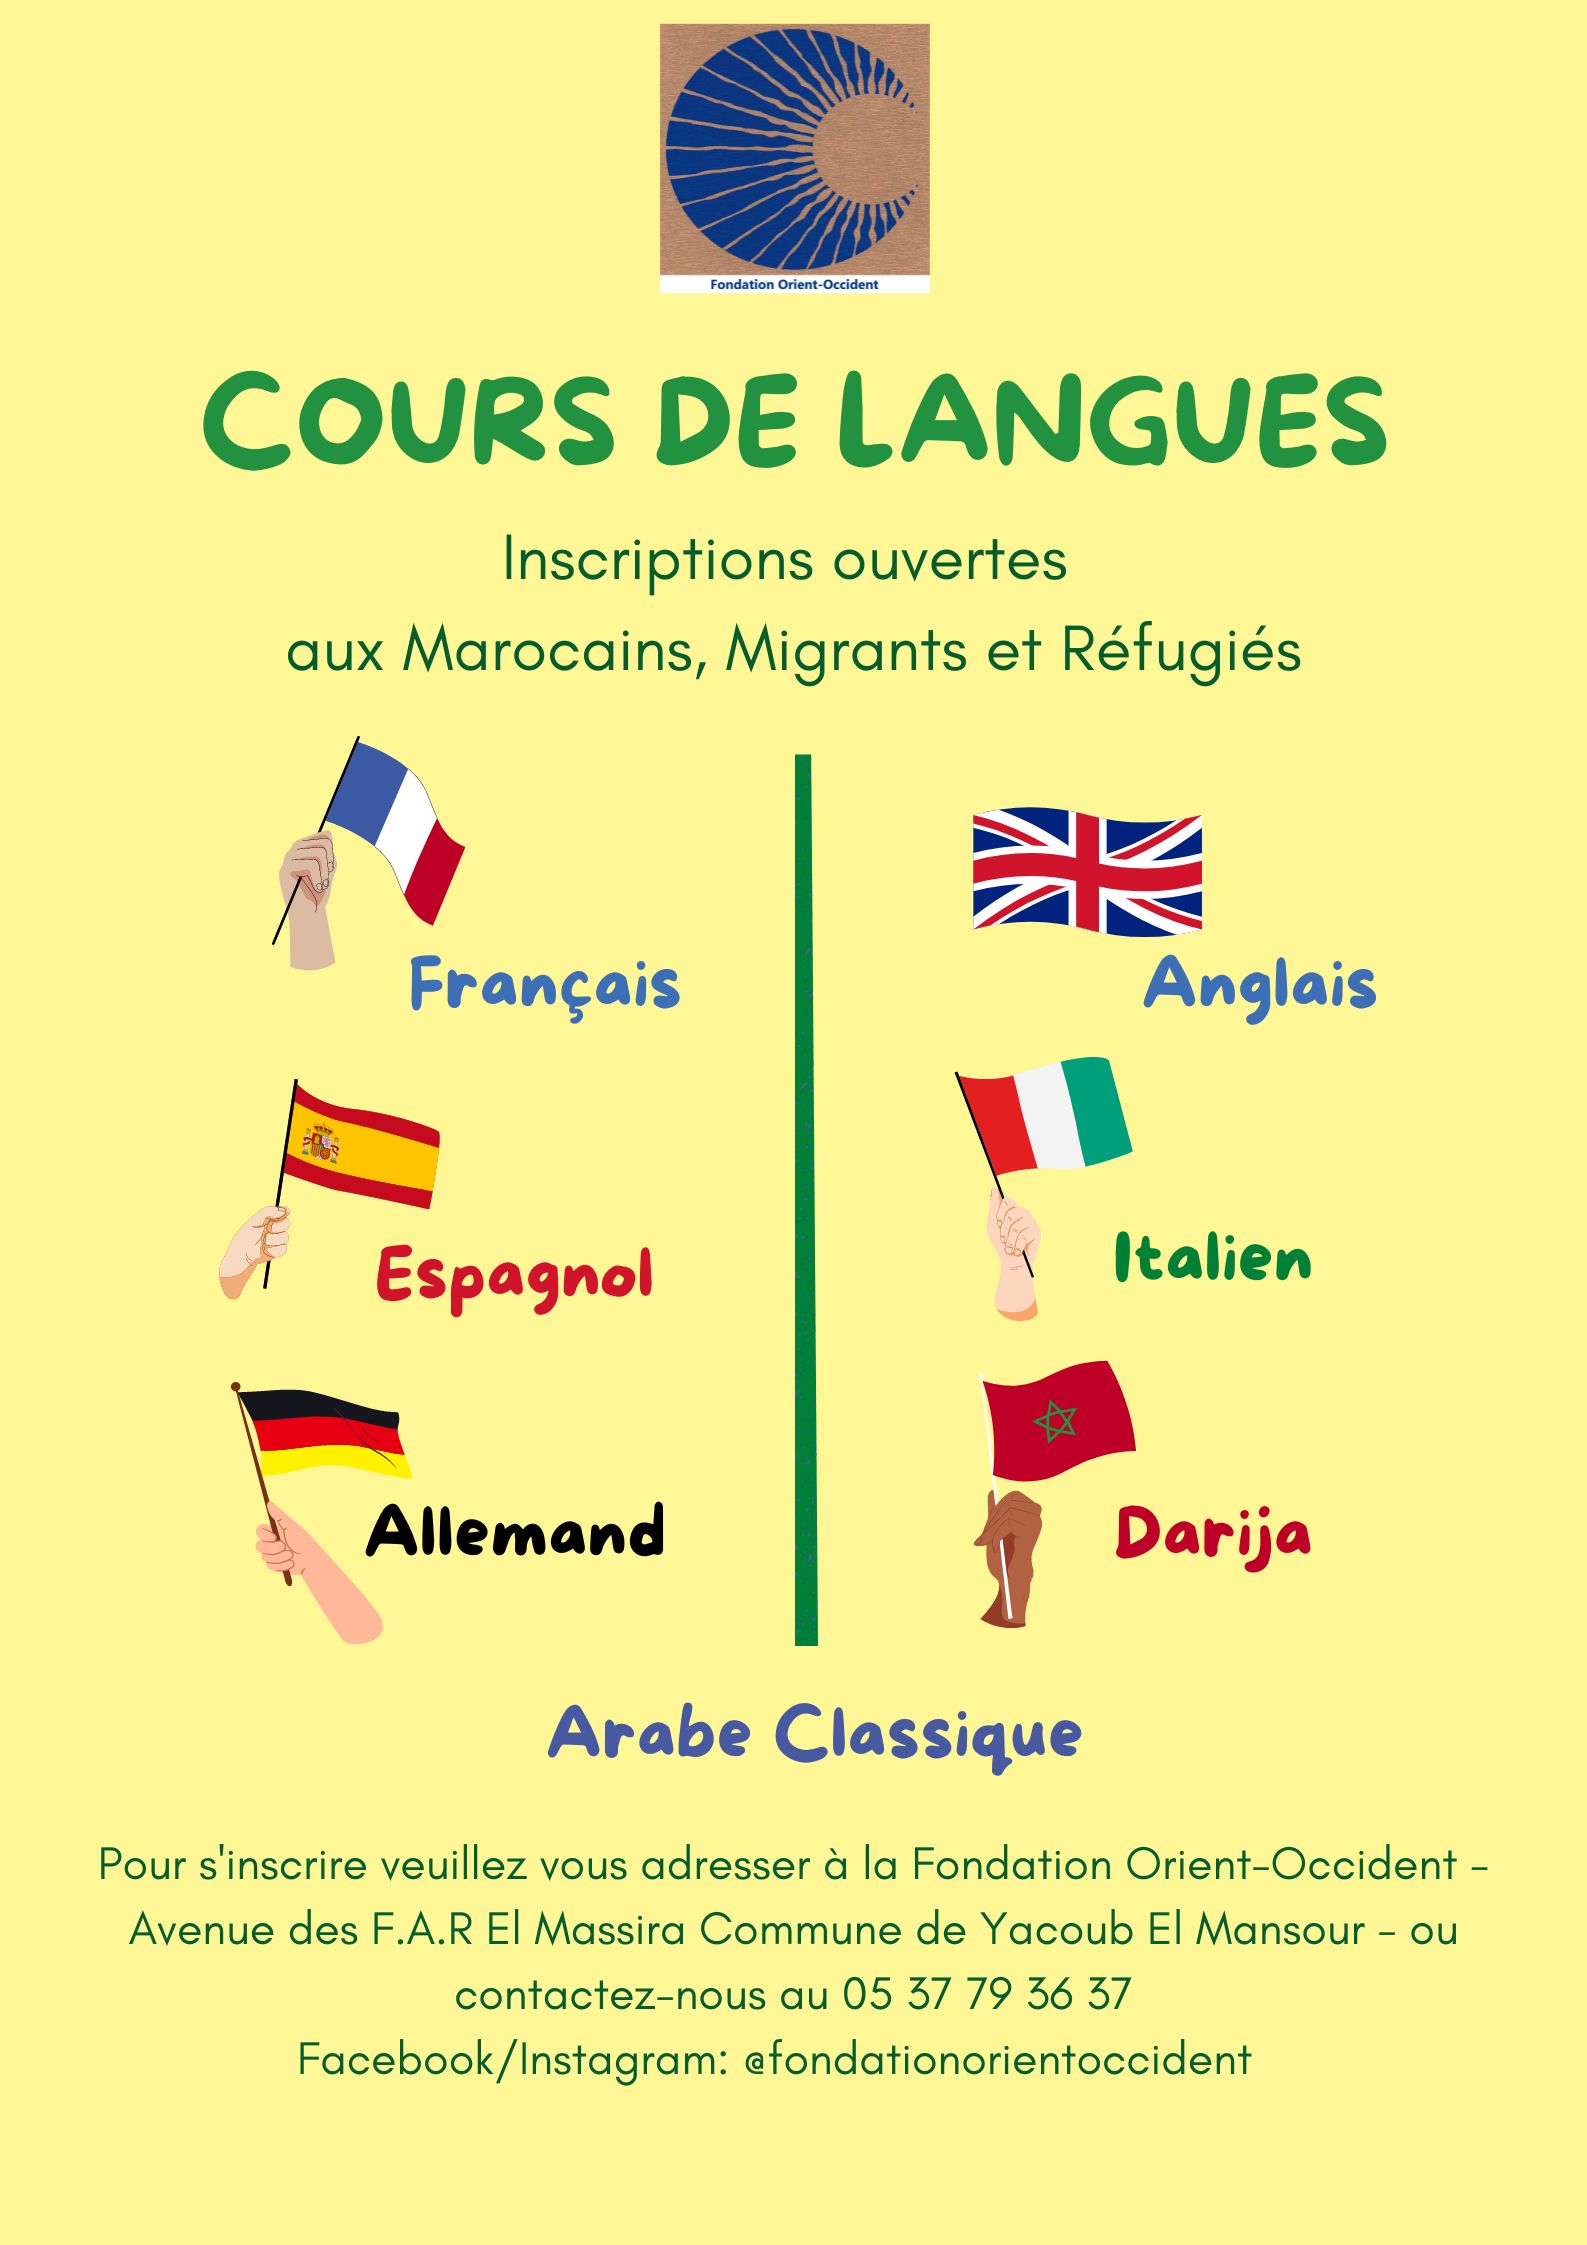 New language courses available at the Fondation Orient-Occident of Rabat